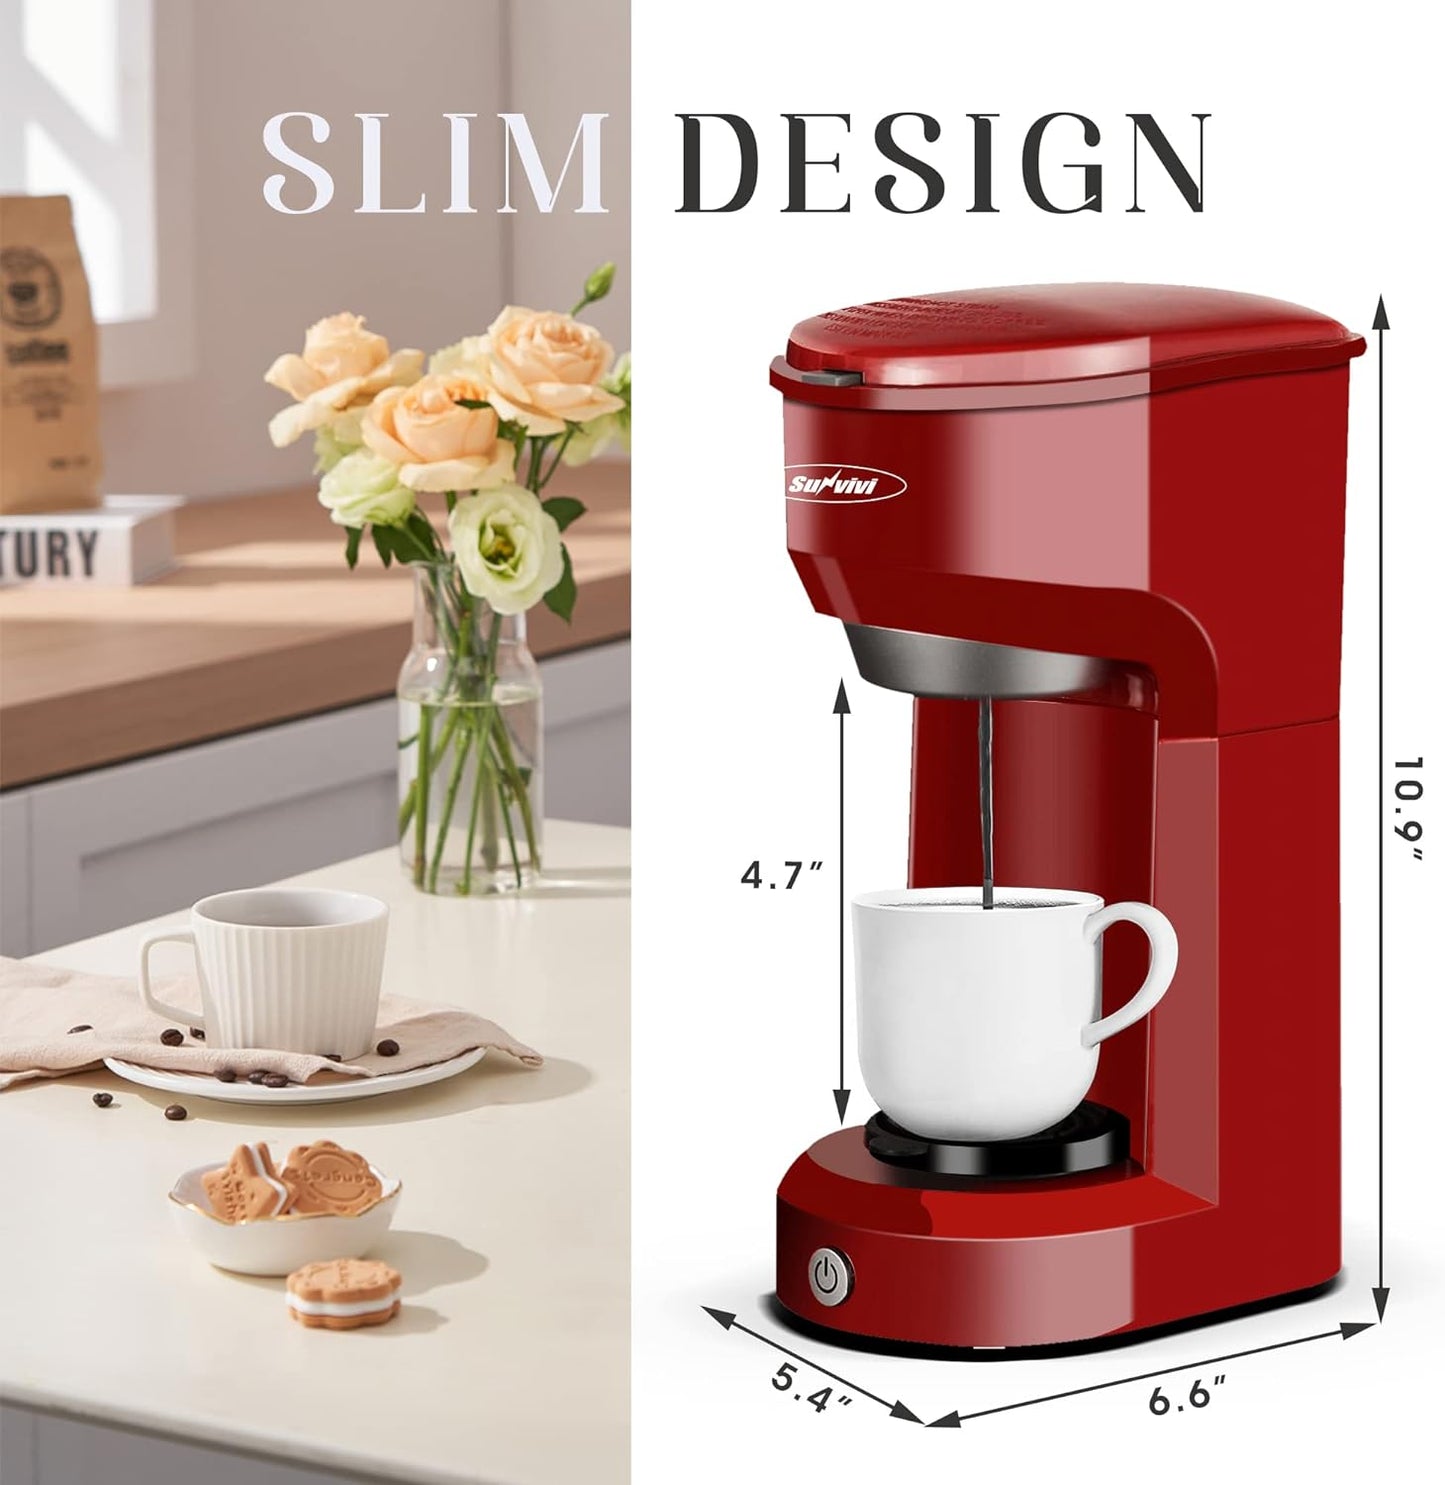 Sunvivi Coffee Maker, Single Serve Brewer for Single Cup, With Permanent Filter, 6oz to 14oz Mug, One-touch Control Button with Illumination,Red (ETL Certified)